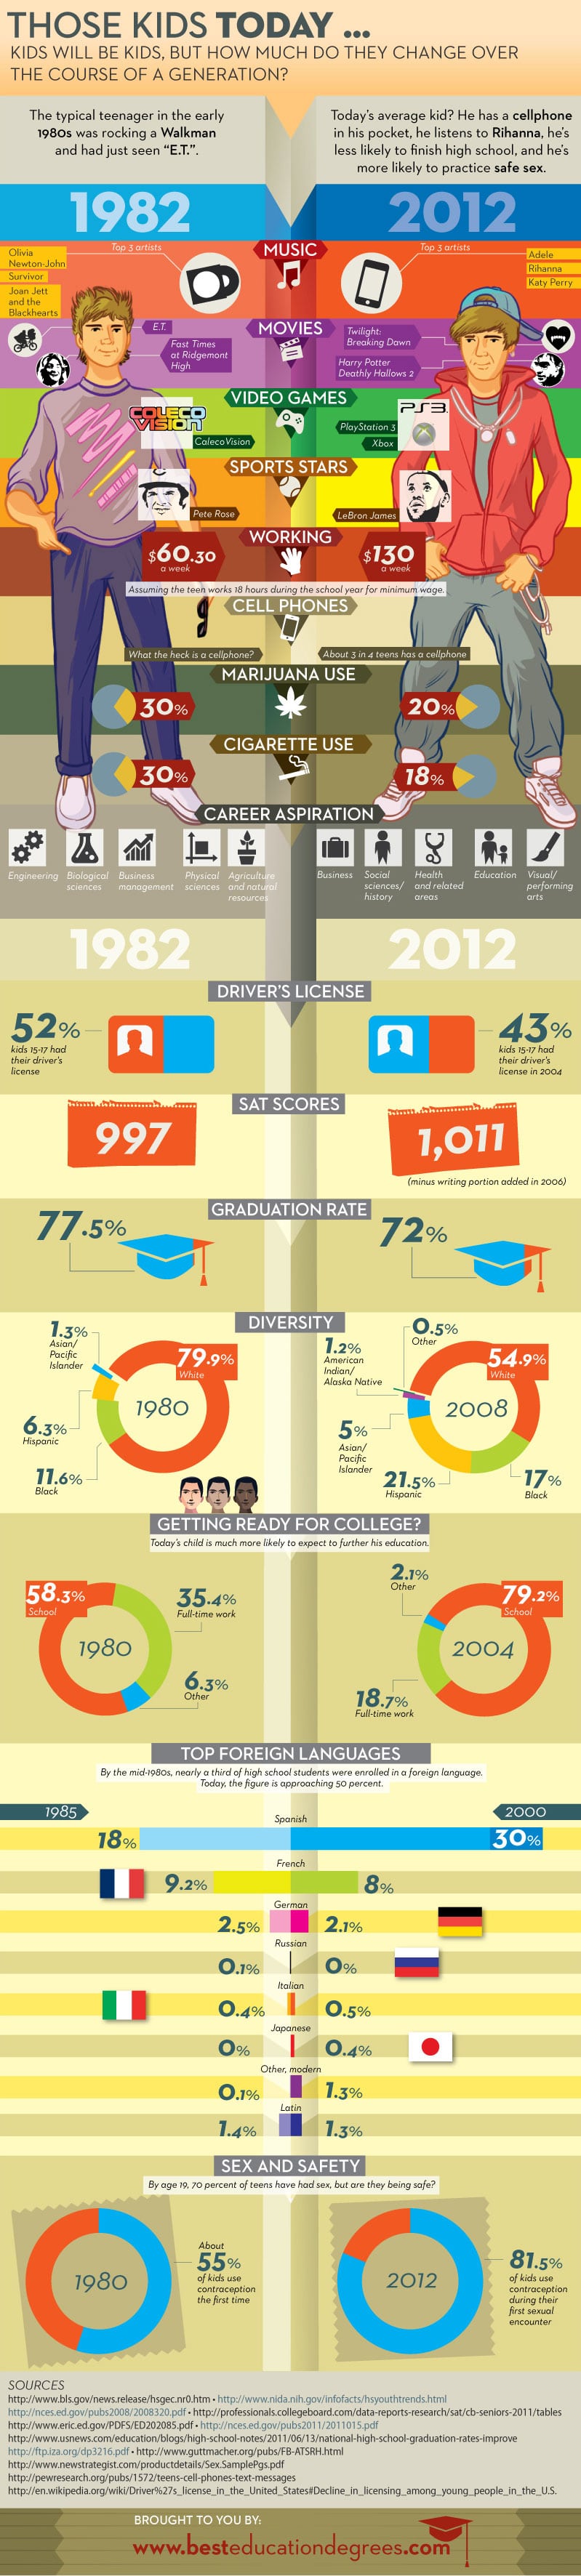 Then & Now: Kids In 1982 vs. Kids In 2012 [Infographic]